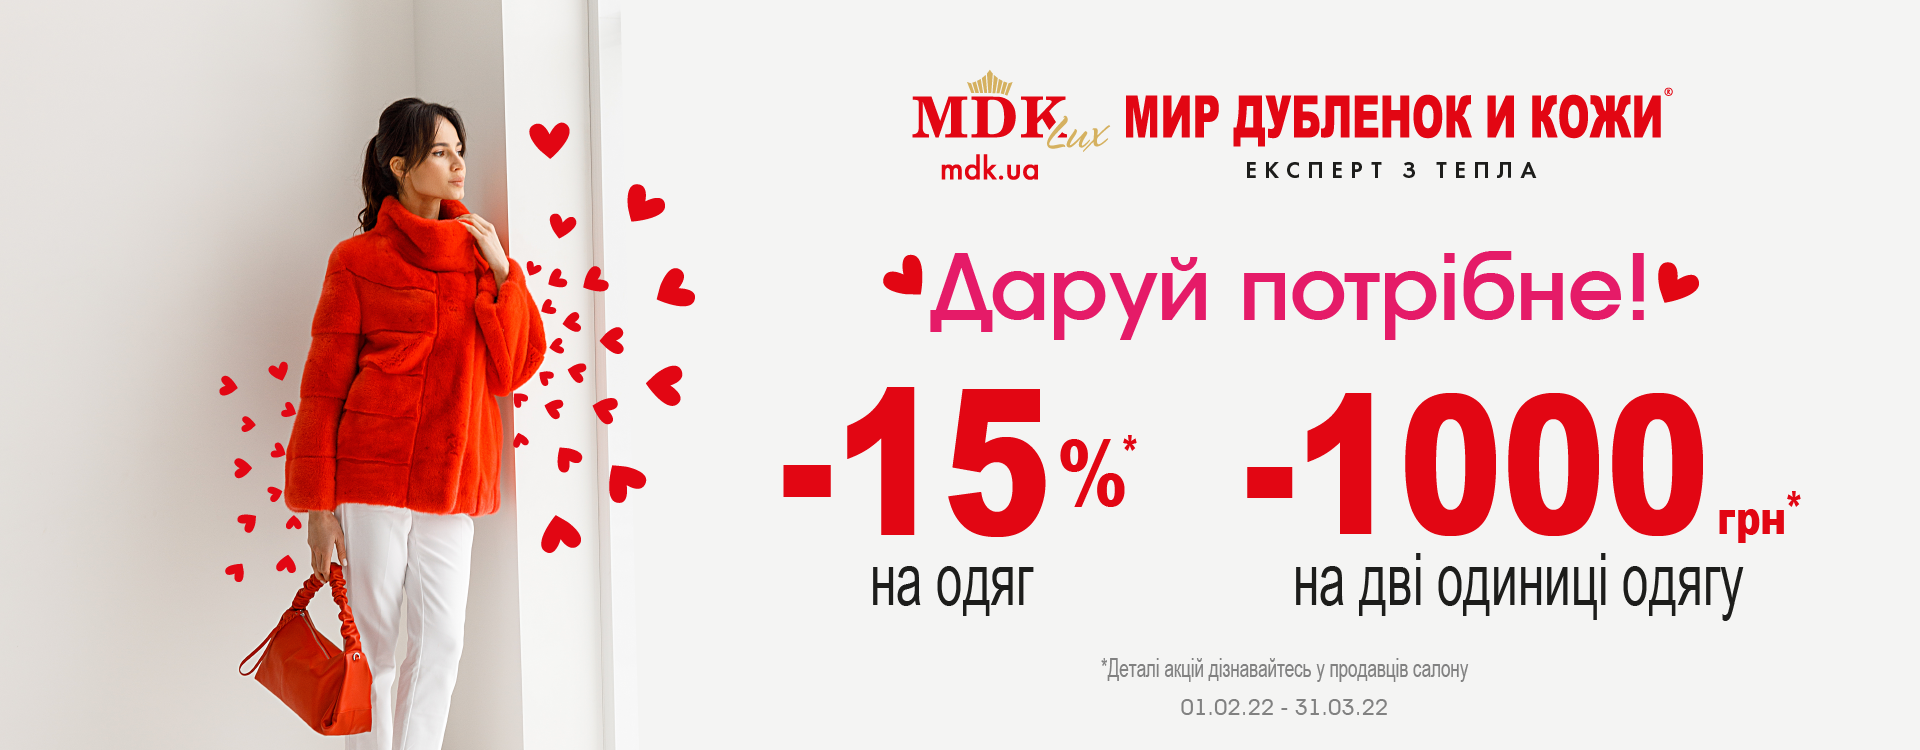 Discount -15% for any clothes in MDK